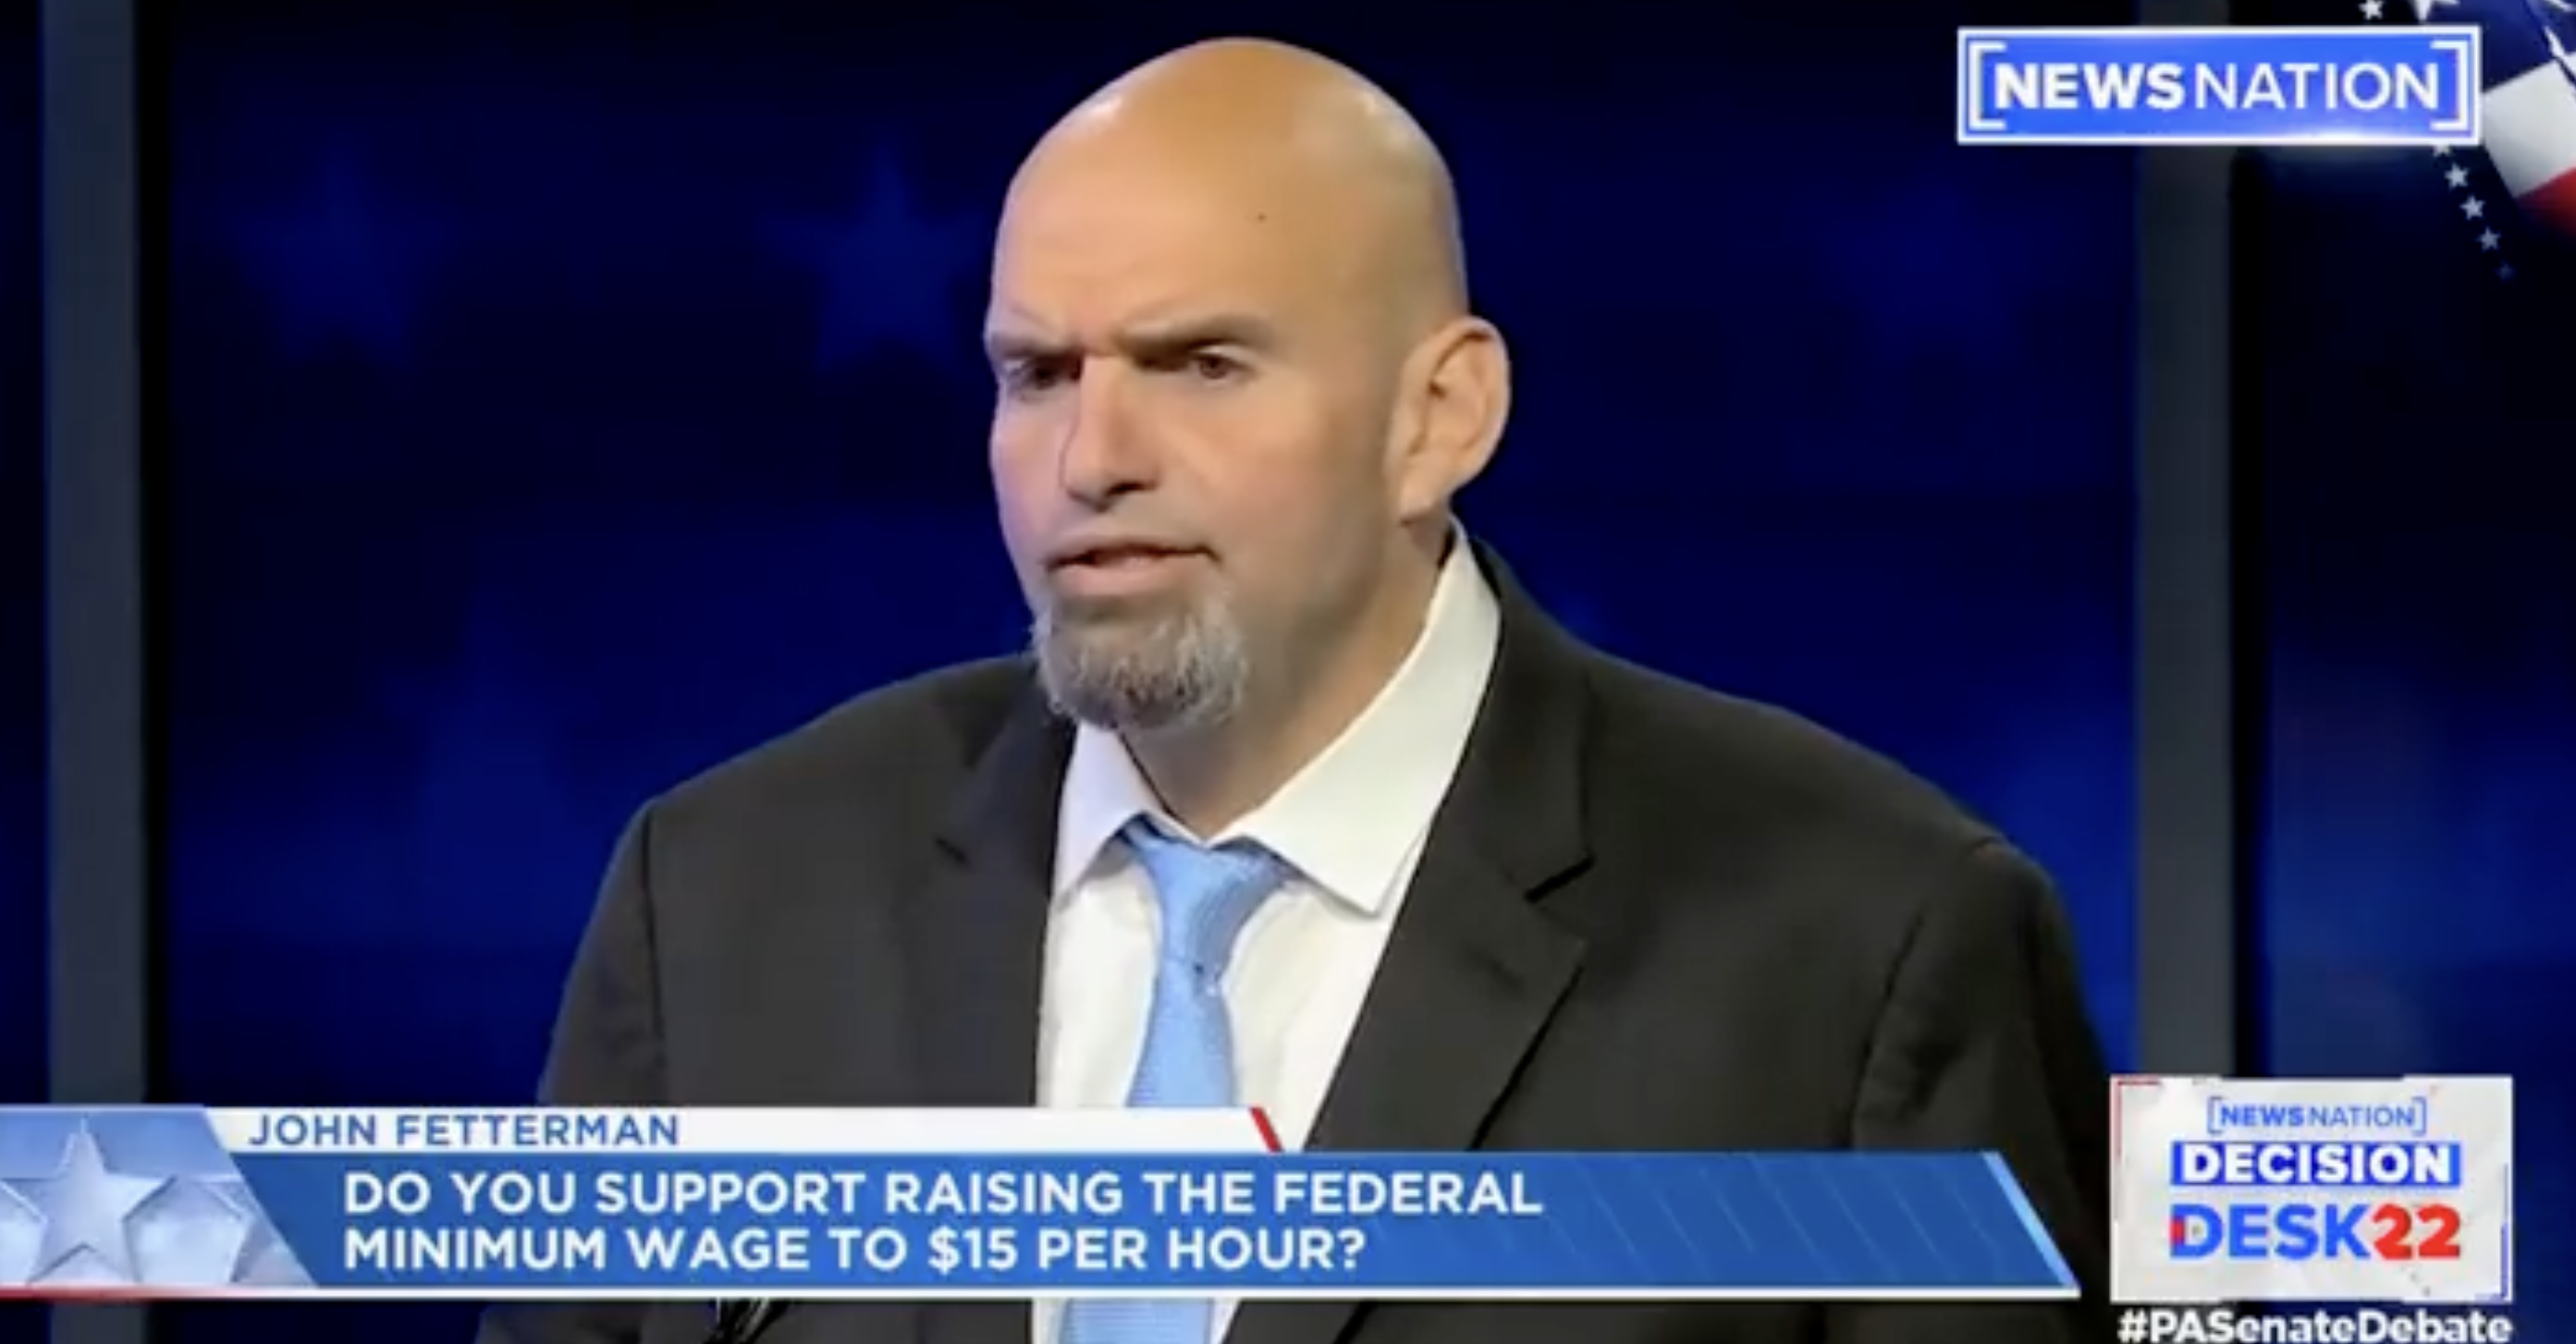 Twitter Questions Fetterman’s Fitness During Post-Stroke Debate Struggles: ‘Painful to Watch’